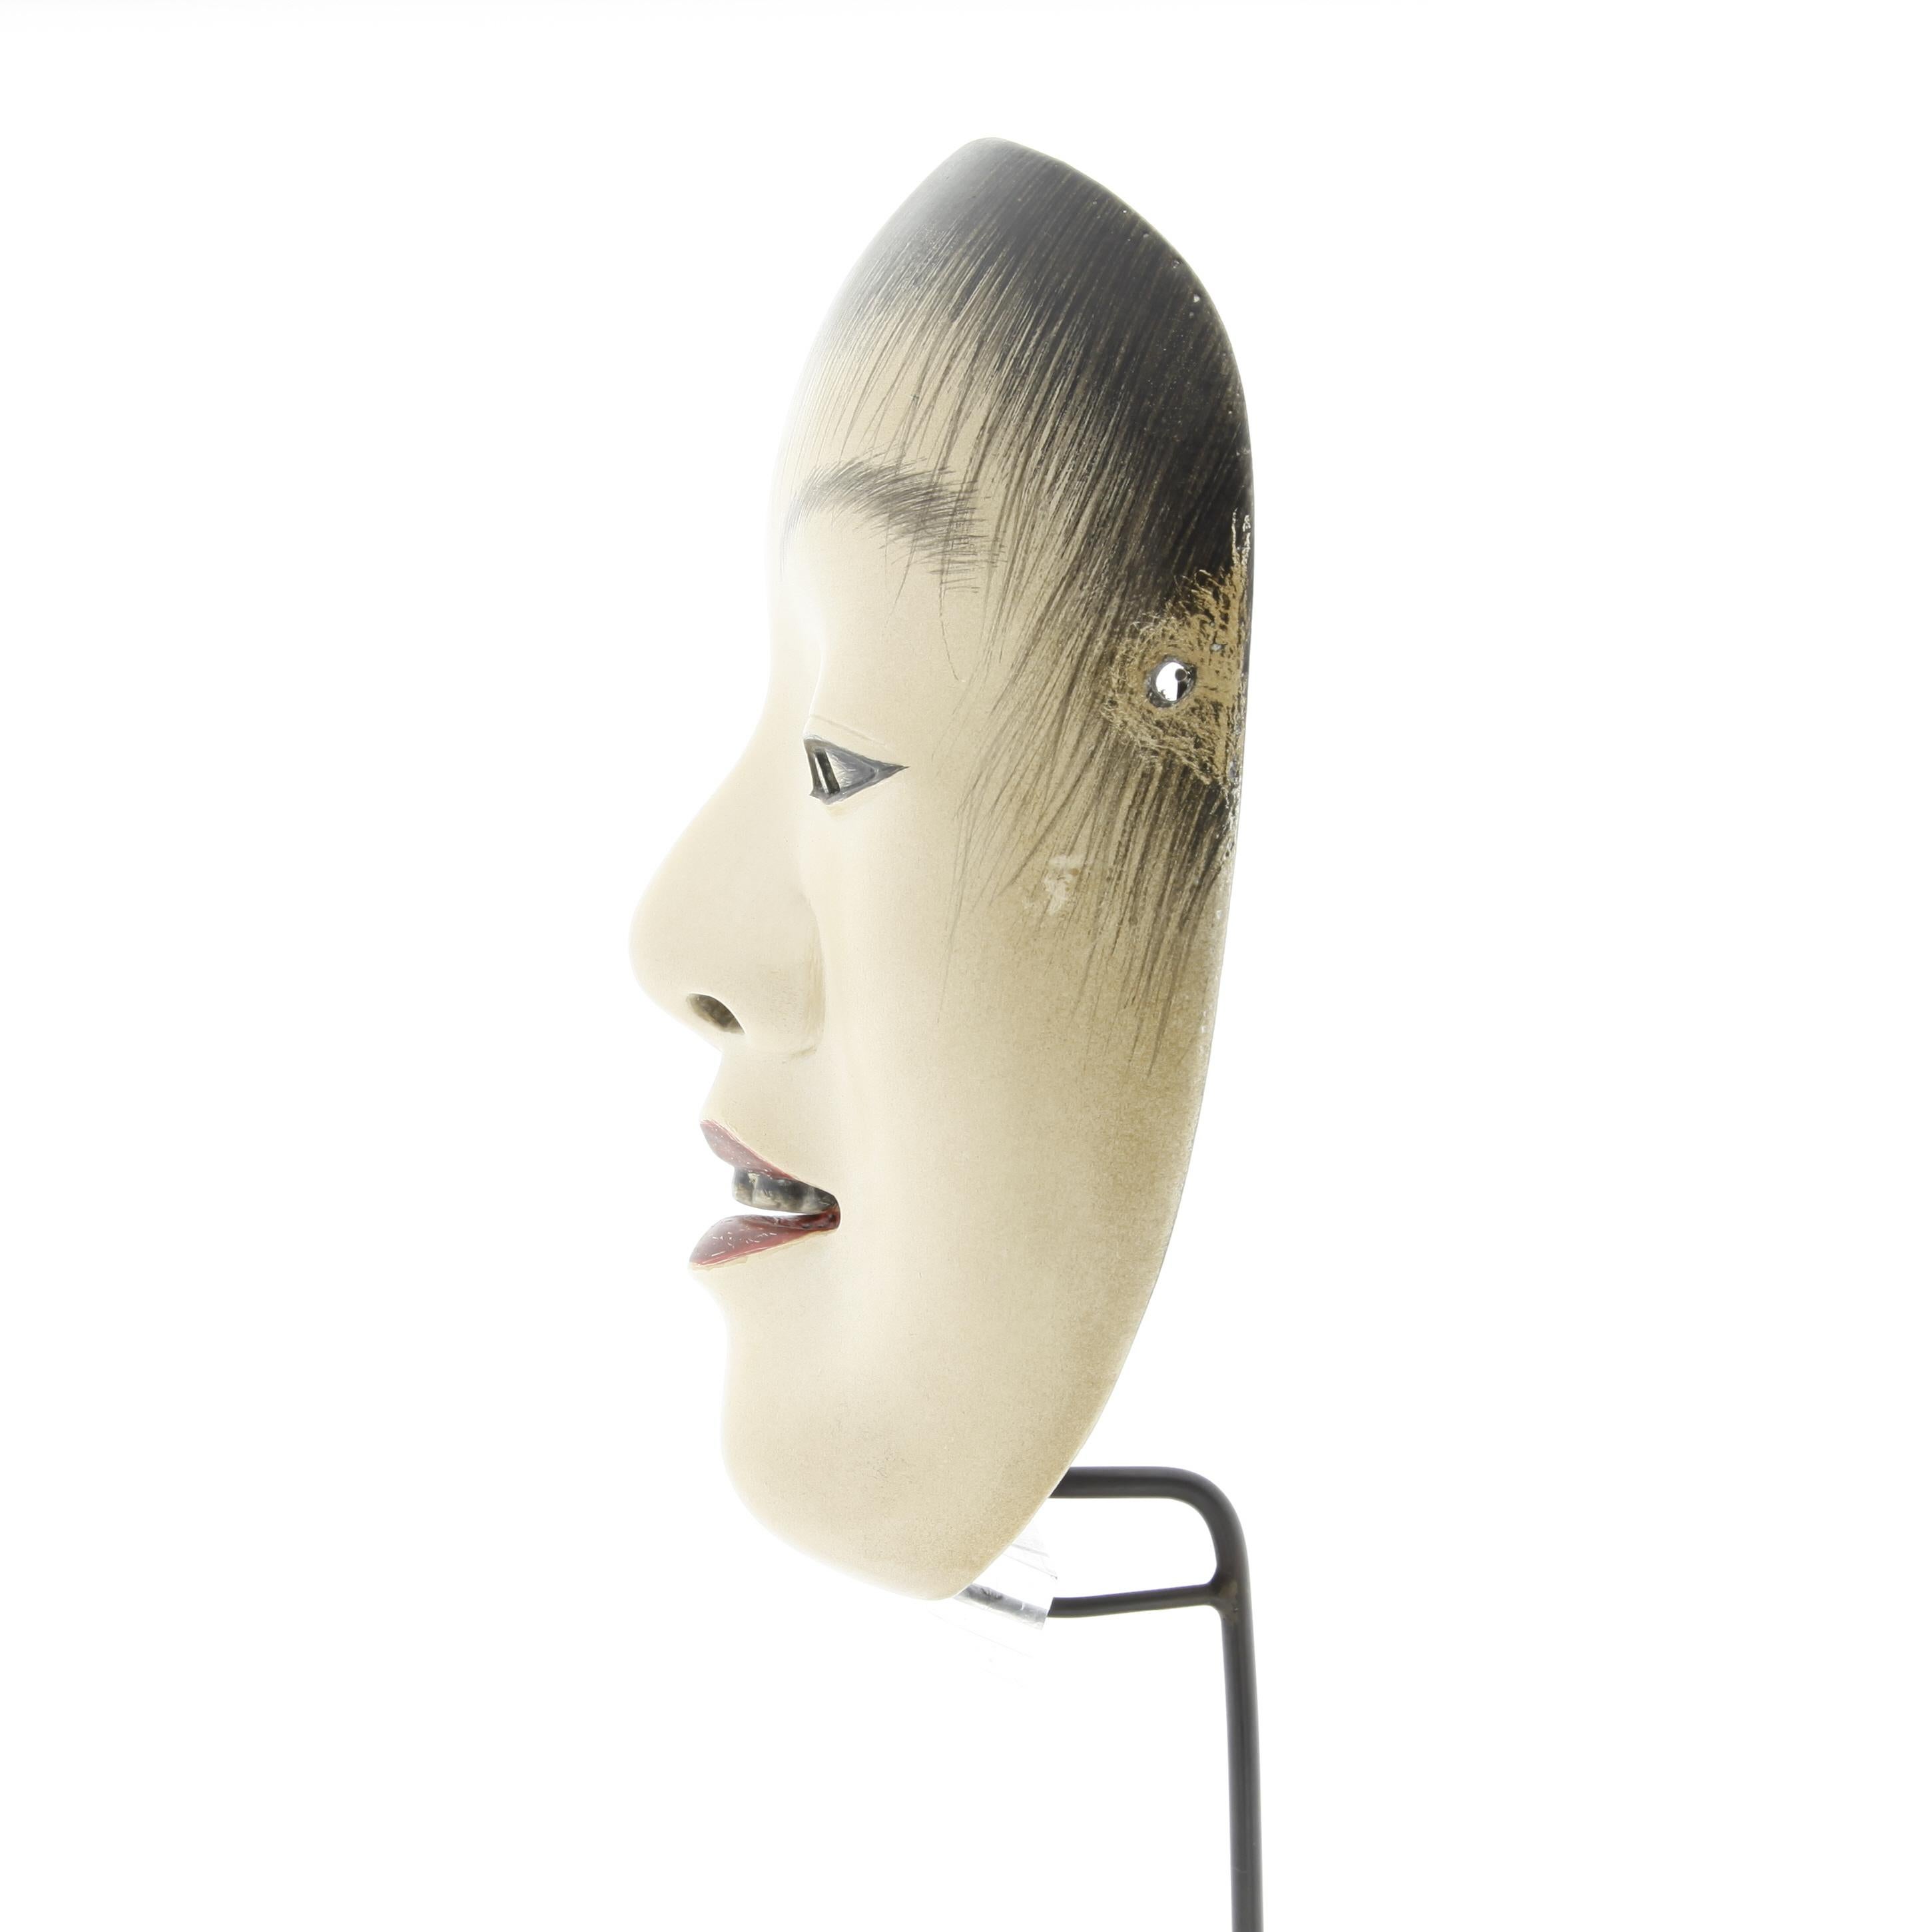 Doji - Noh mask of a young boy

Date: 19th century
Size: 20.5 x 14 cm

Doji represents a young boy, with a face slightly rounded and feminine, almost androgynous. Although in Japanese the word 'doji' means 'child', in Noh it refers to a divine